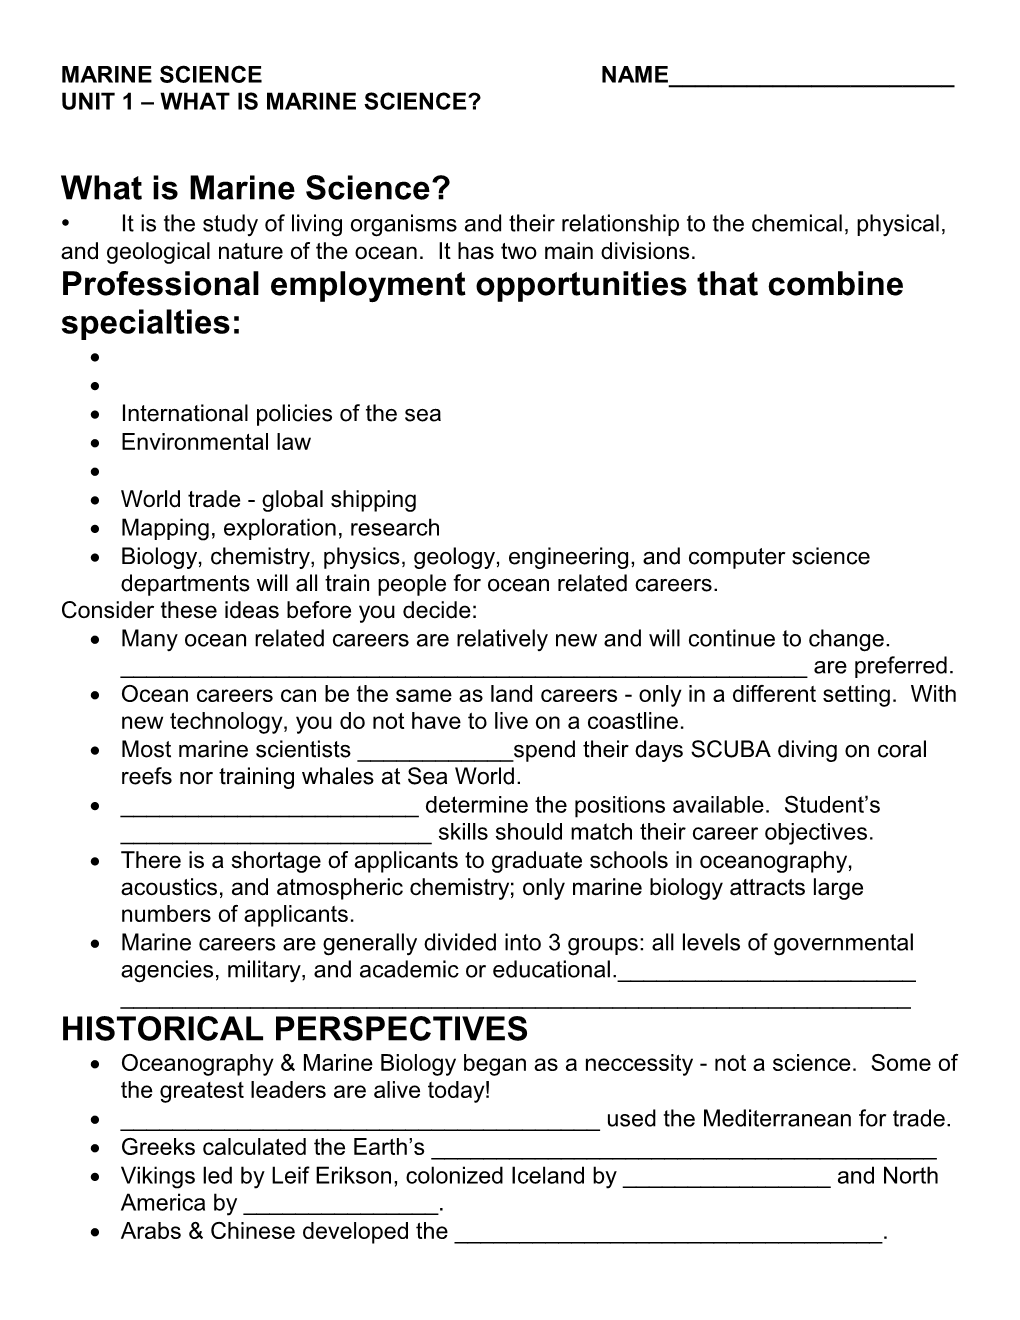 What Is Marine Science